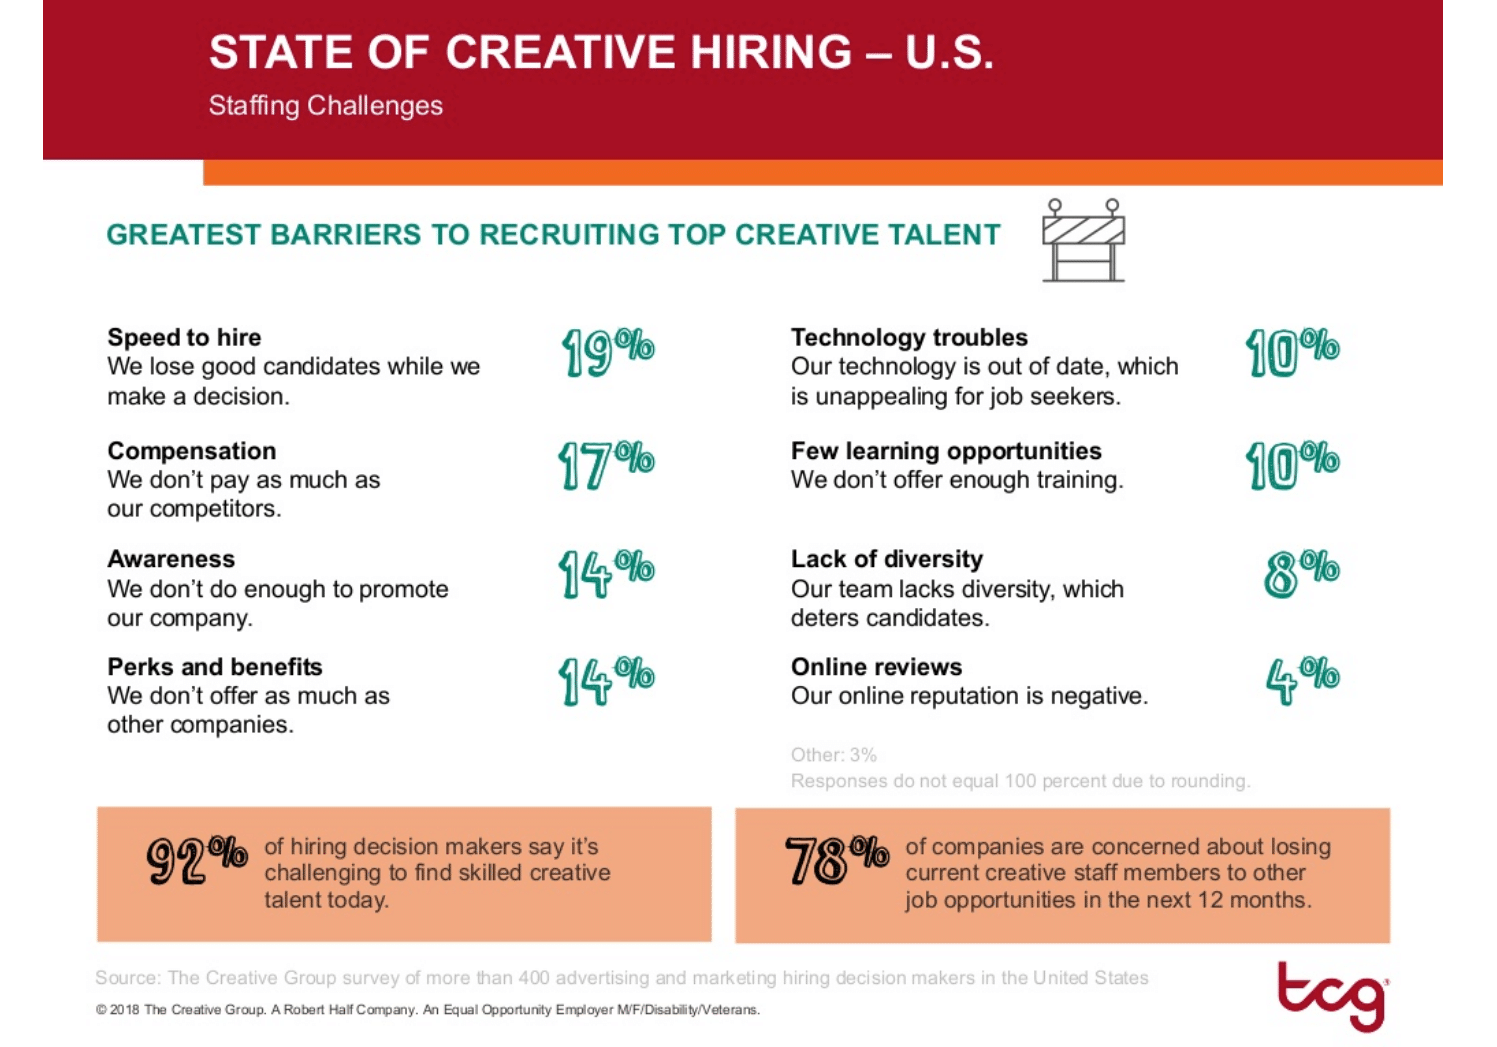 6 In 10 companies plan to expand creative teams in first half of 2019